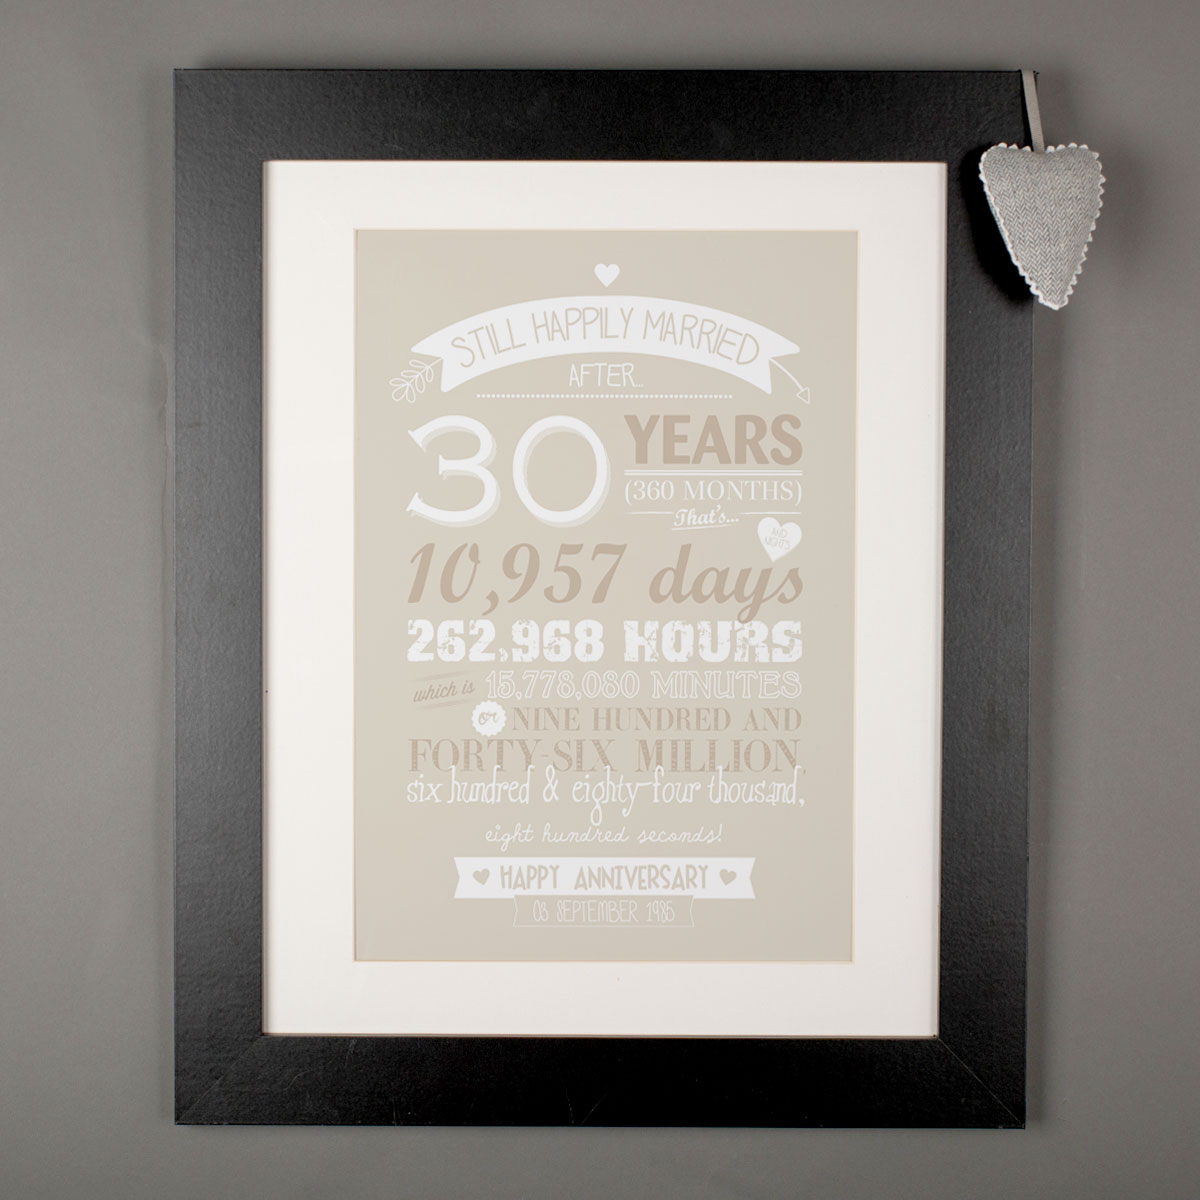 Personalised Framed Print - After 30 Years